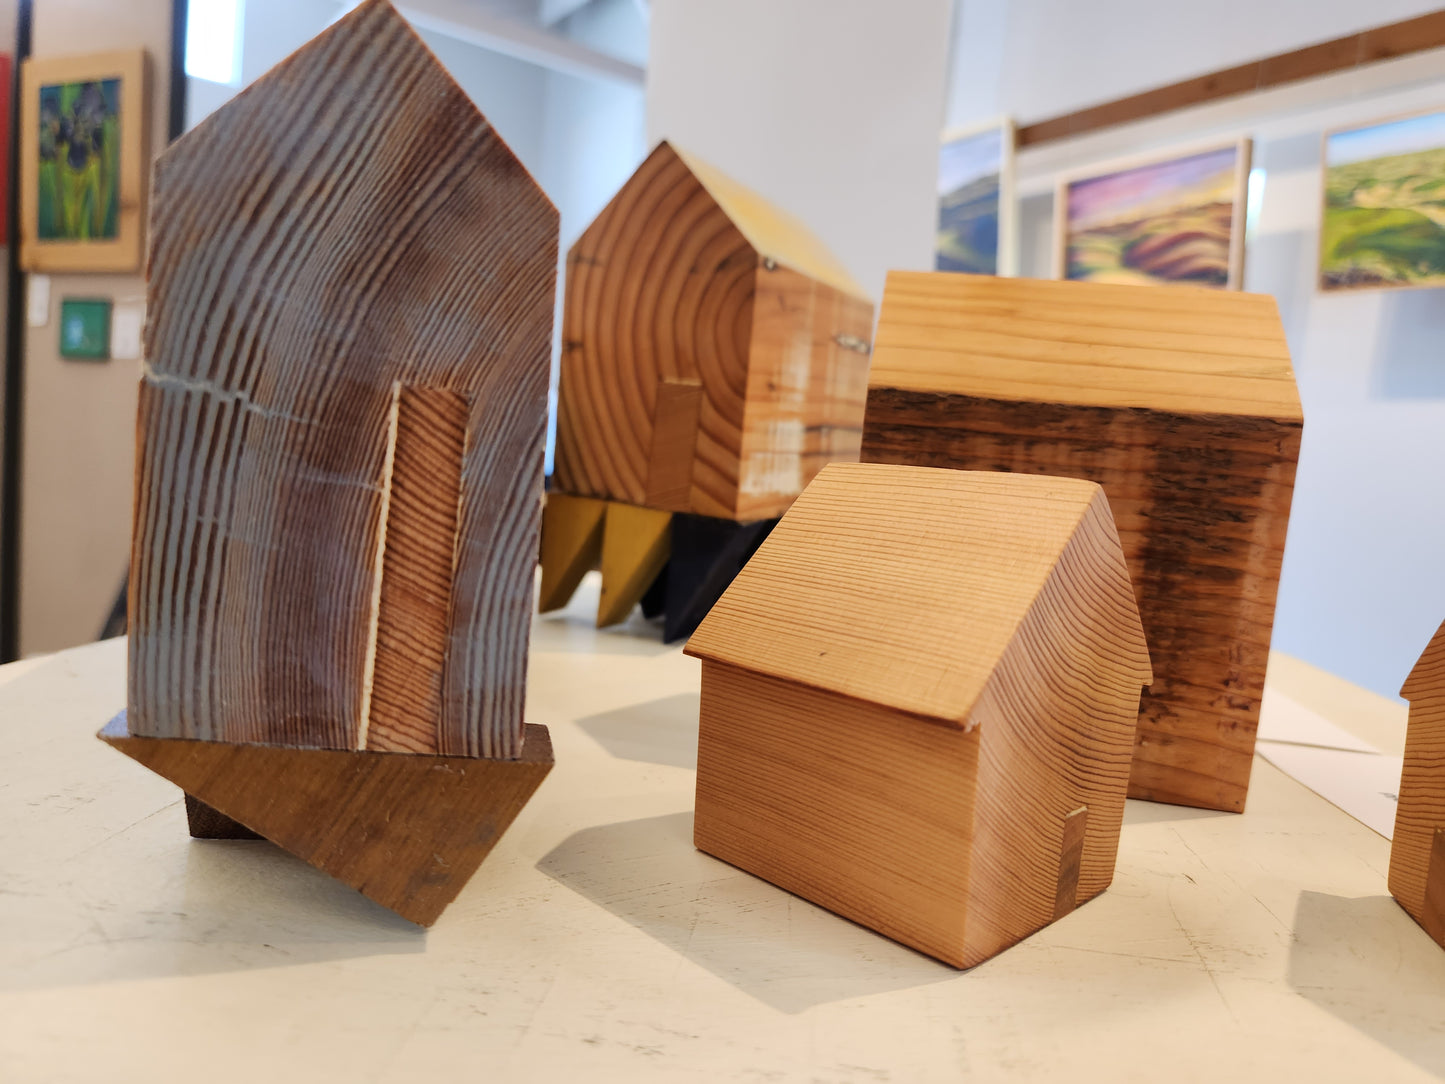 Affordable Houses - David Herbold - Wood/ pigment/beeswax